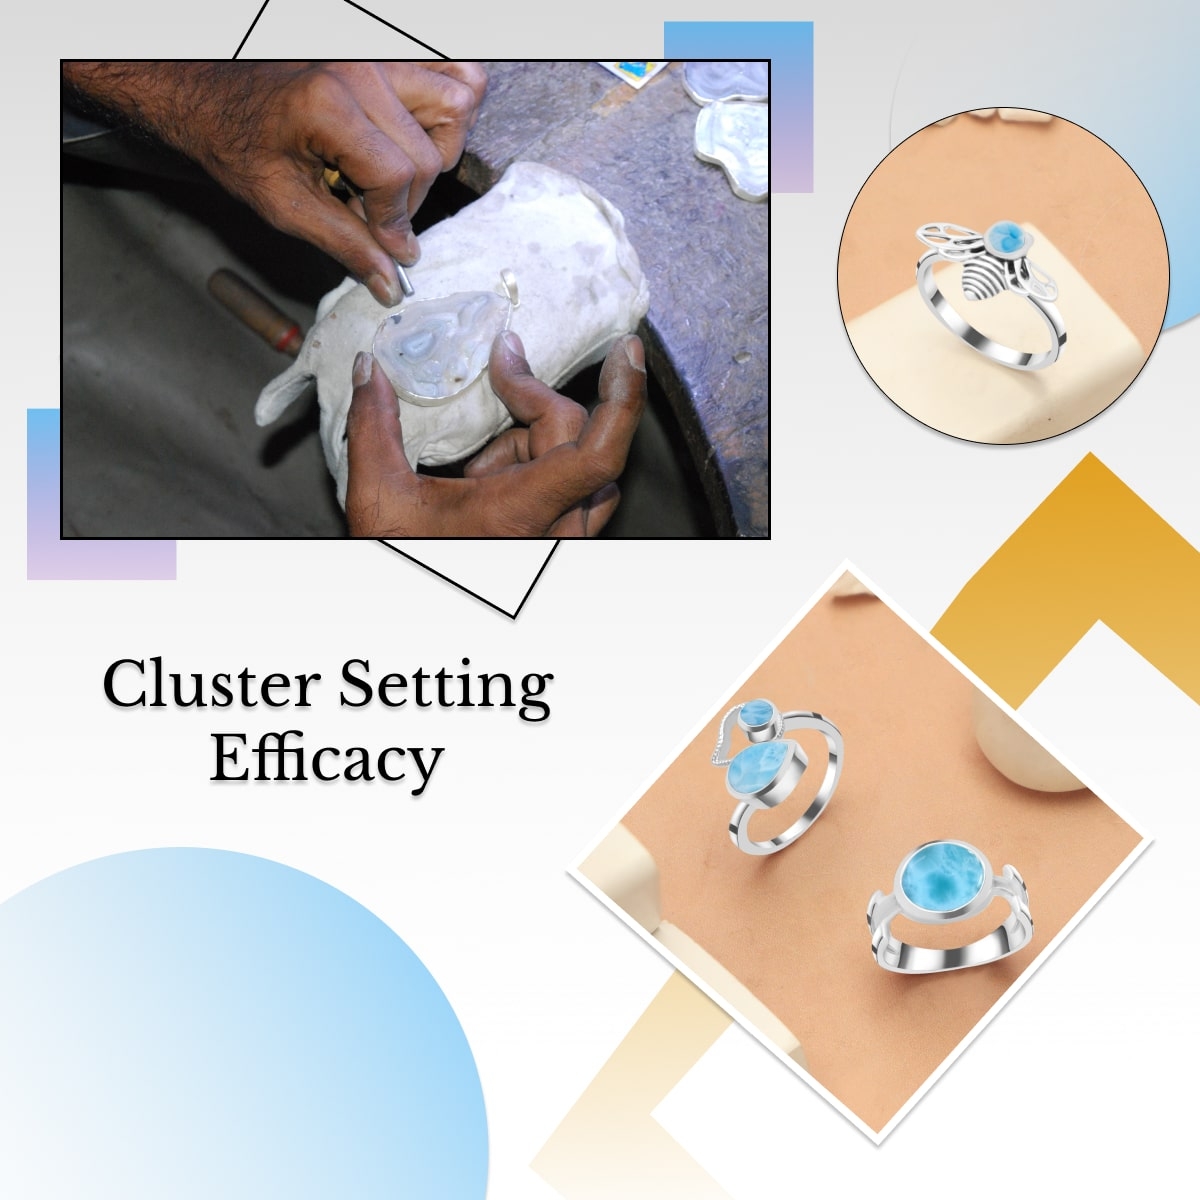 Cost-effectiveness of Cluster Setting